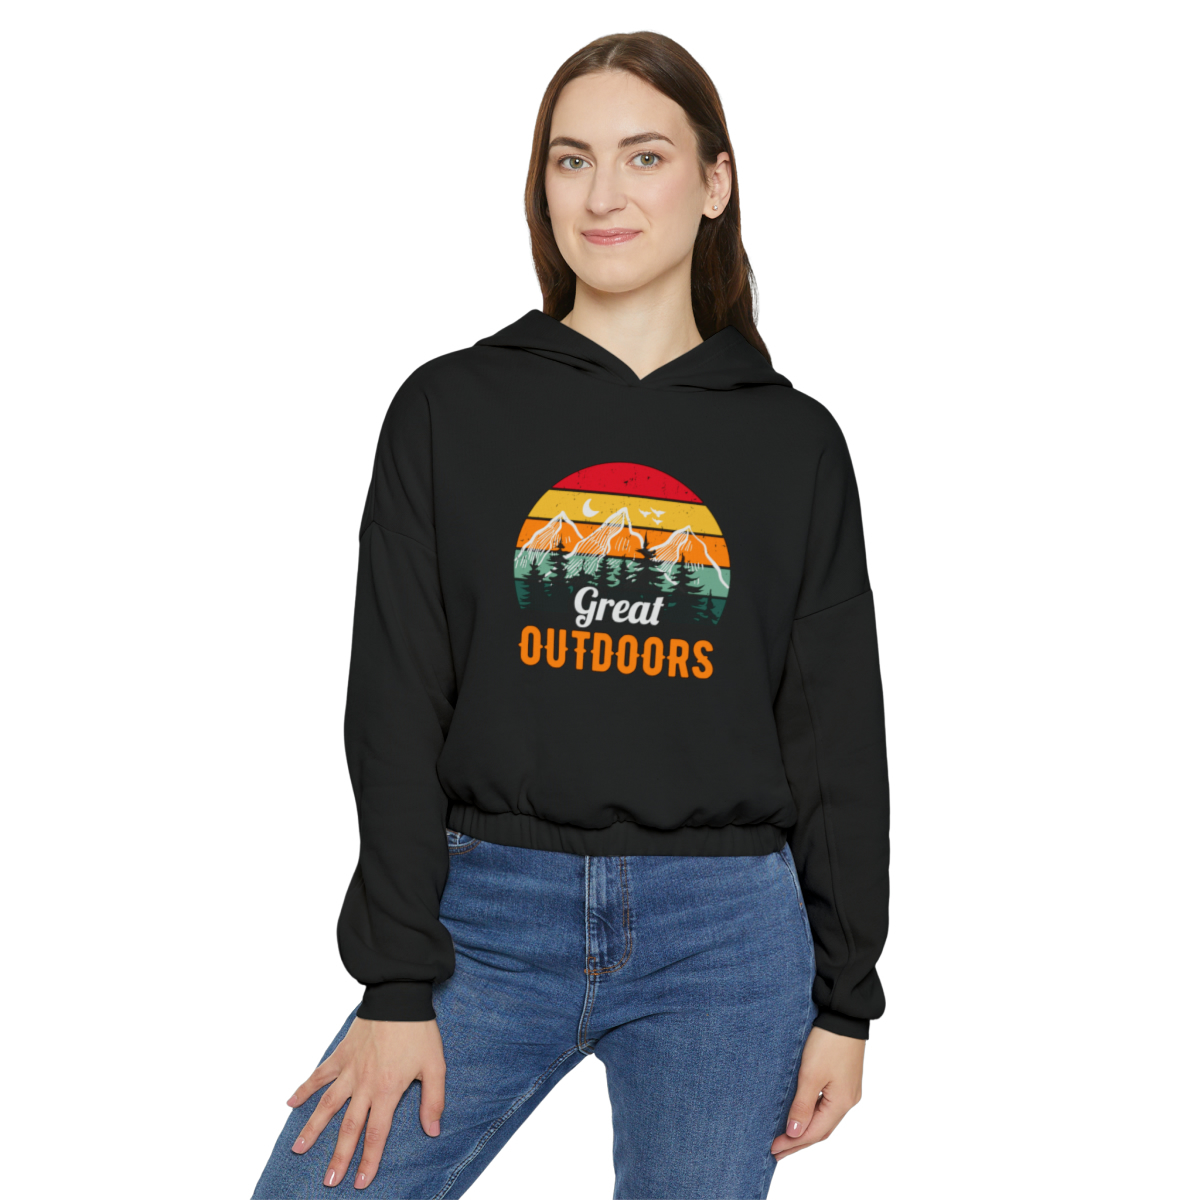 Retro Sunset Women's Cinched Bottom Hoodie: Style Meets Comfort - $62.83